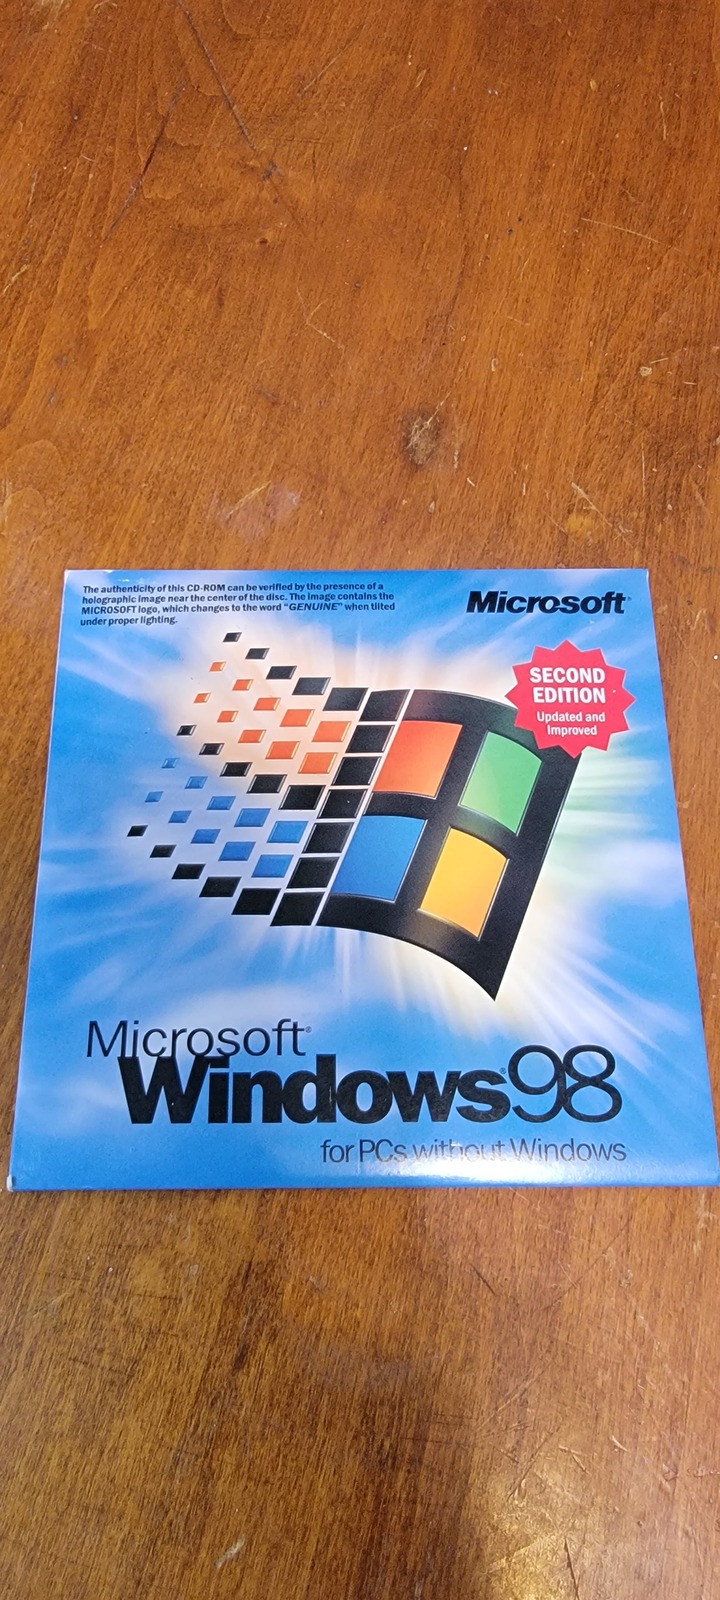 Microsoft Windows 98 Full Disk Second Edition with product key - $40.00